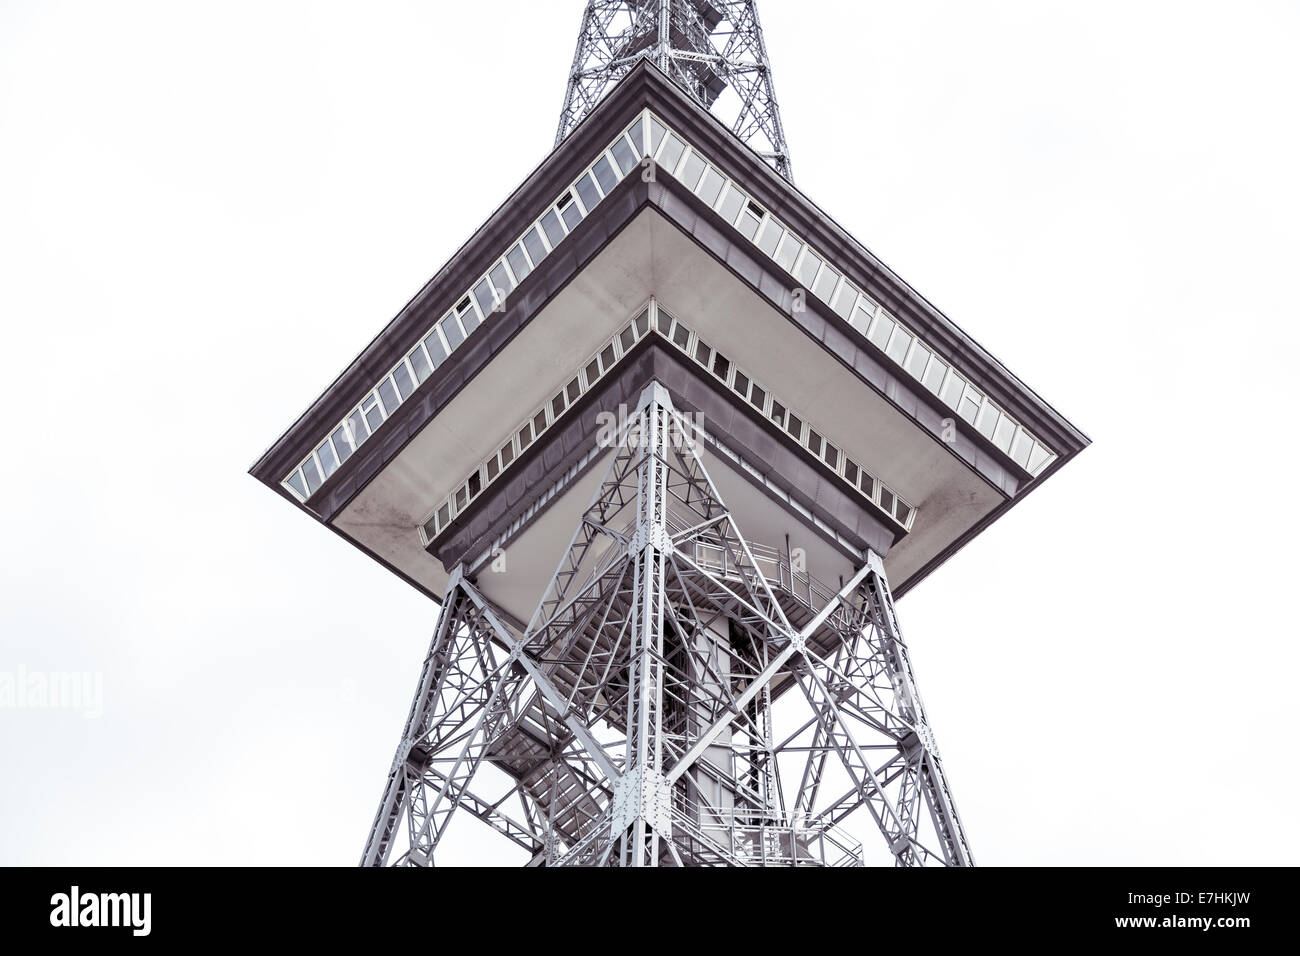 detail shoot of the funkturm, berlin germany Stock Photo